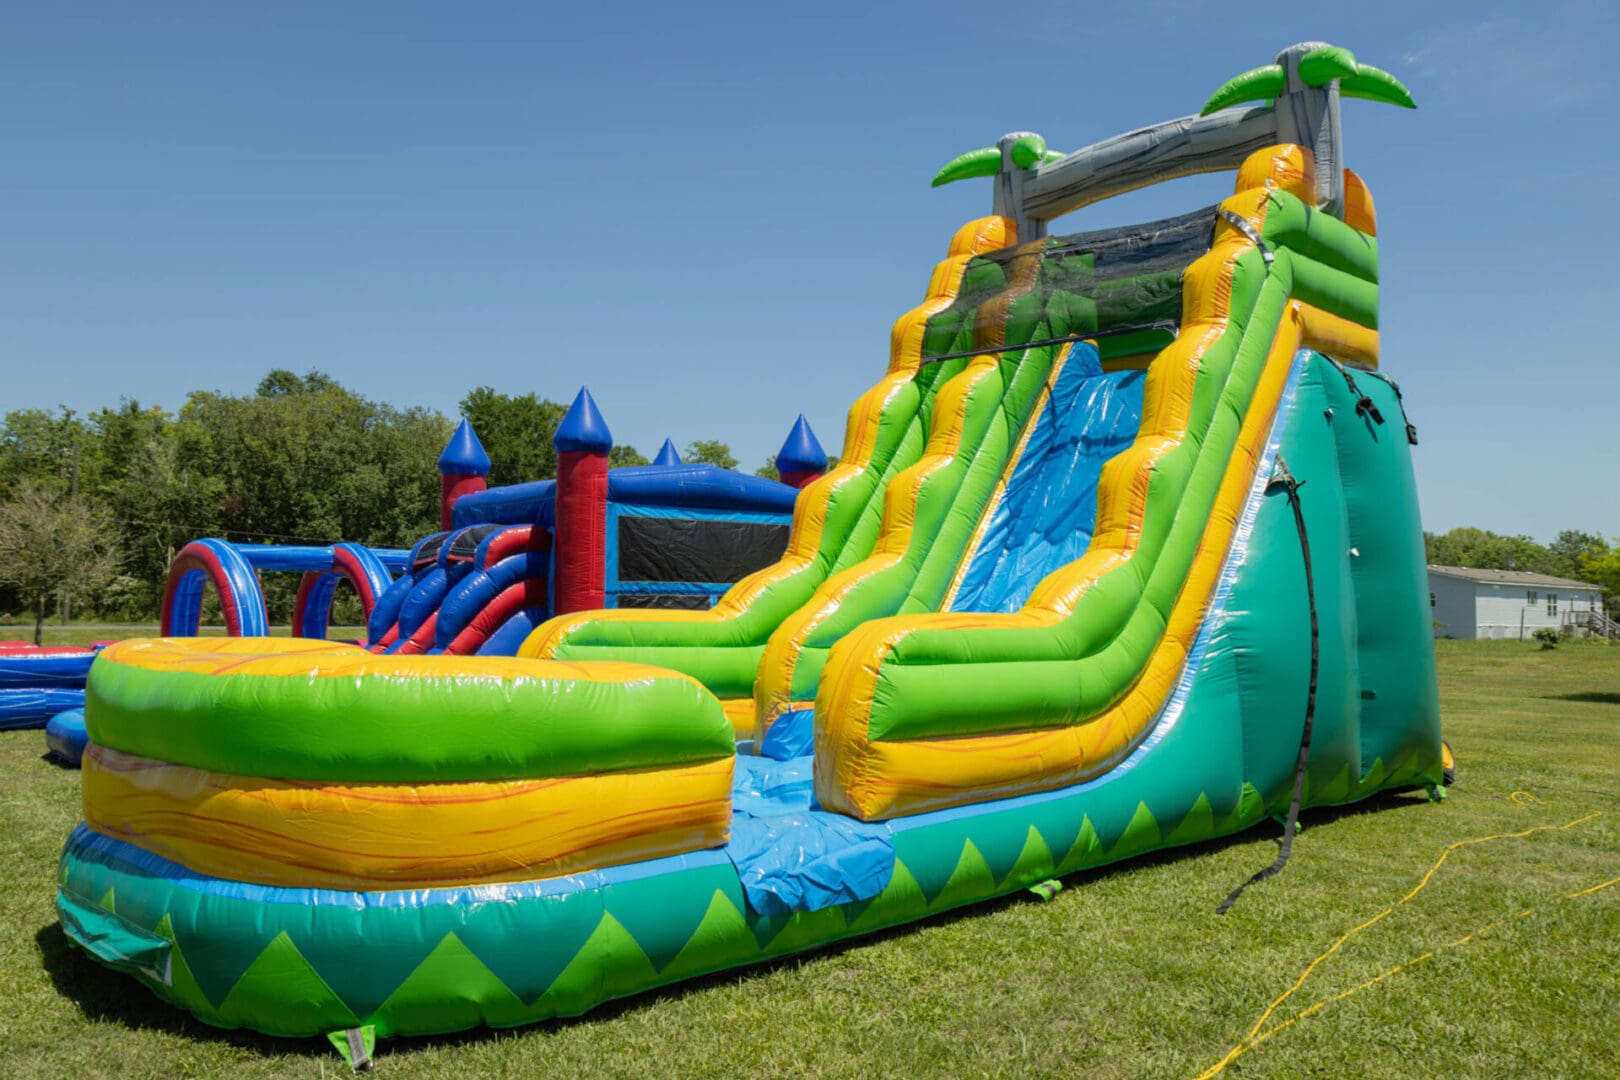 A large inflatable slide in the grass.